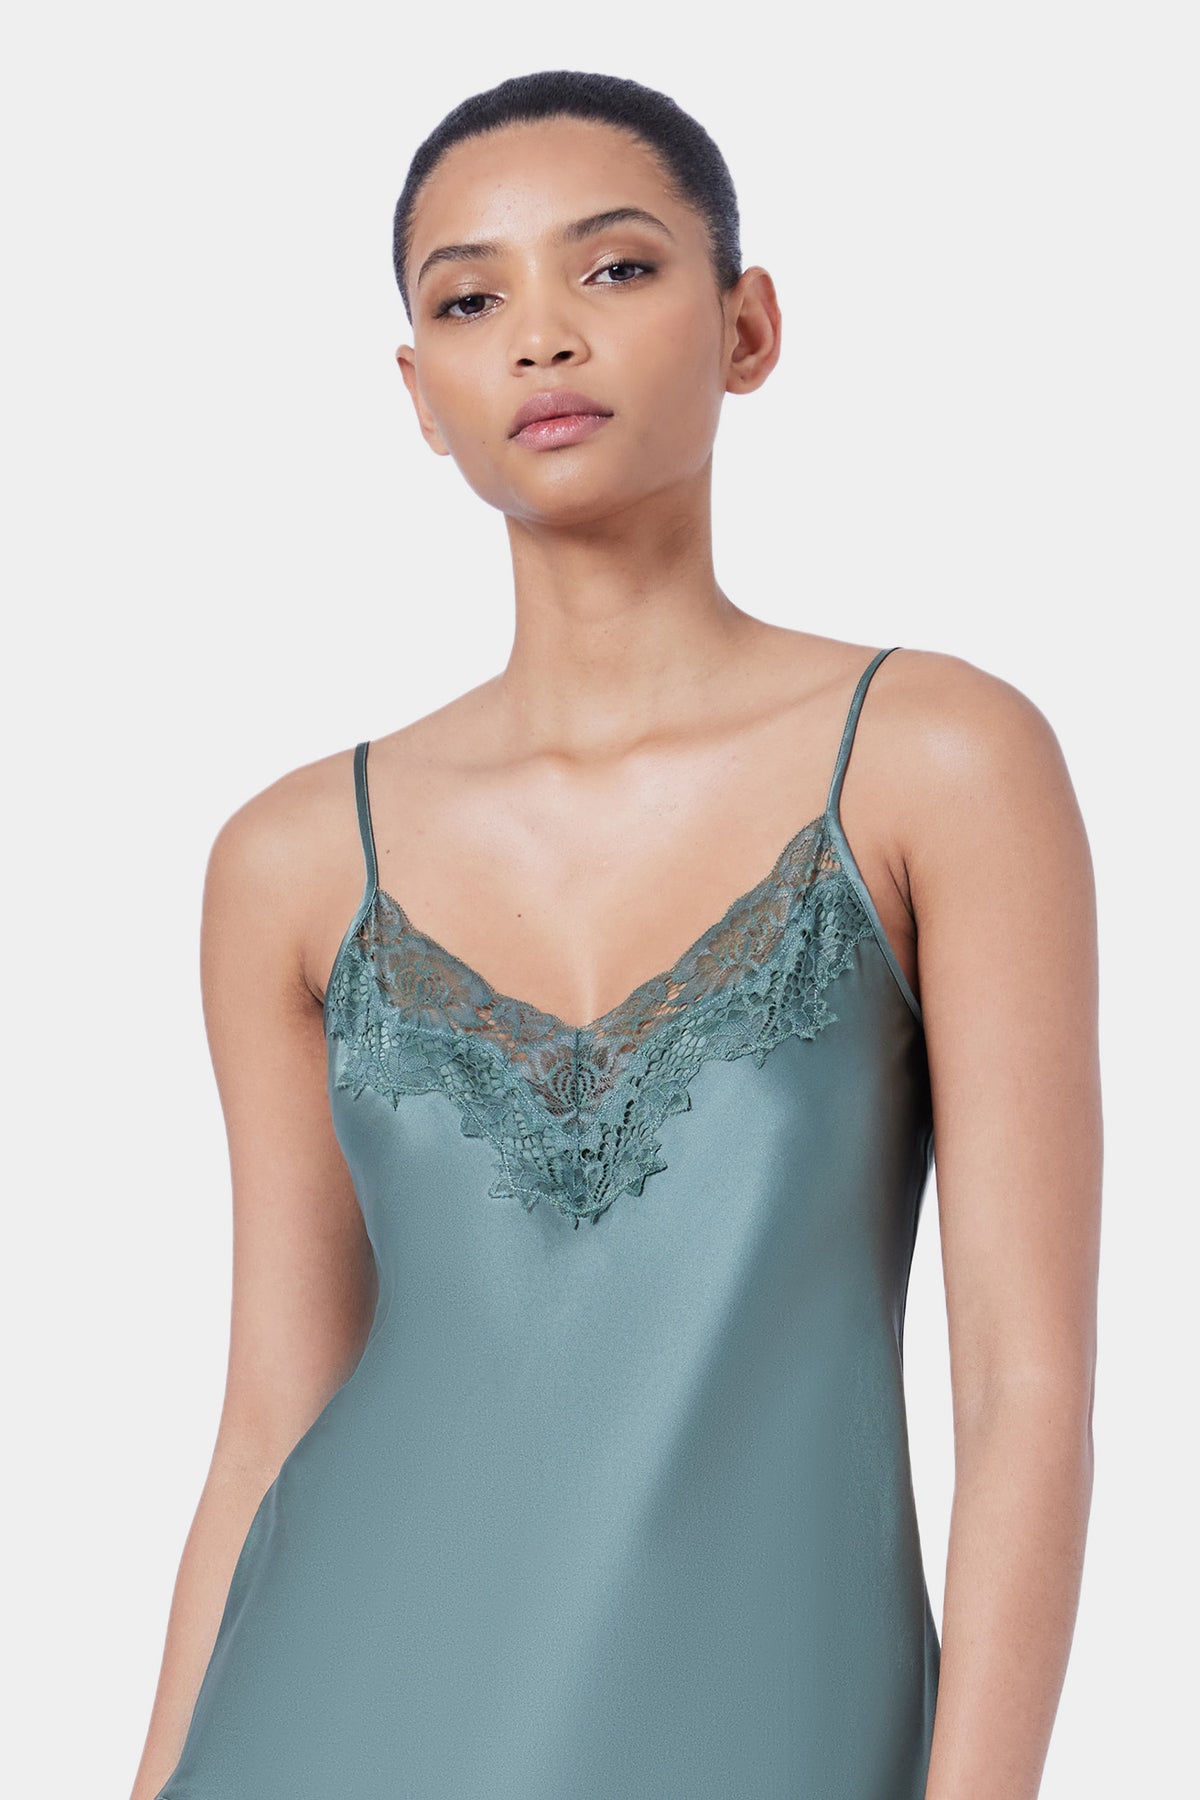 The Silk Lace Cami By GINIA In Moss